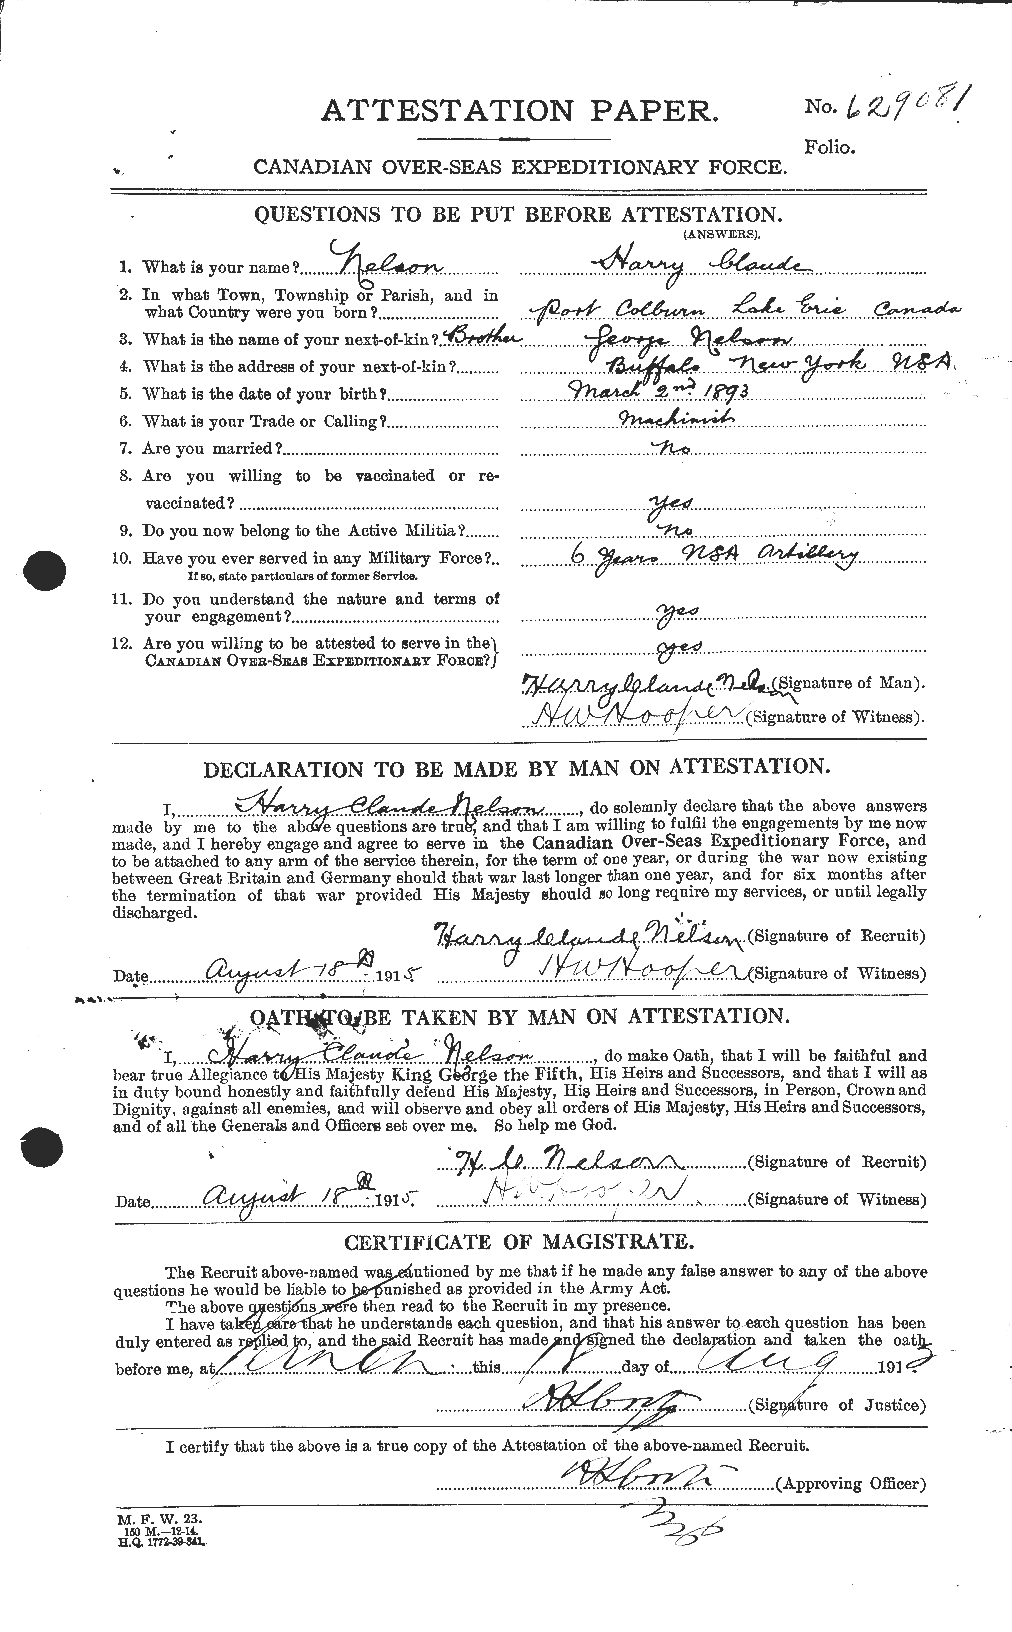 Personnel Records of the First World War - CEF 543848a